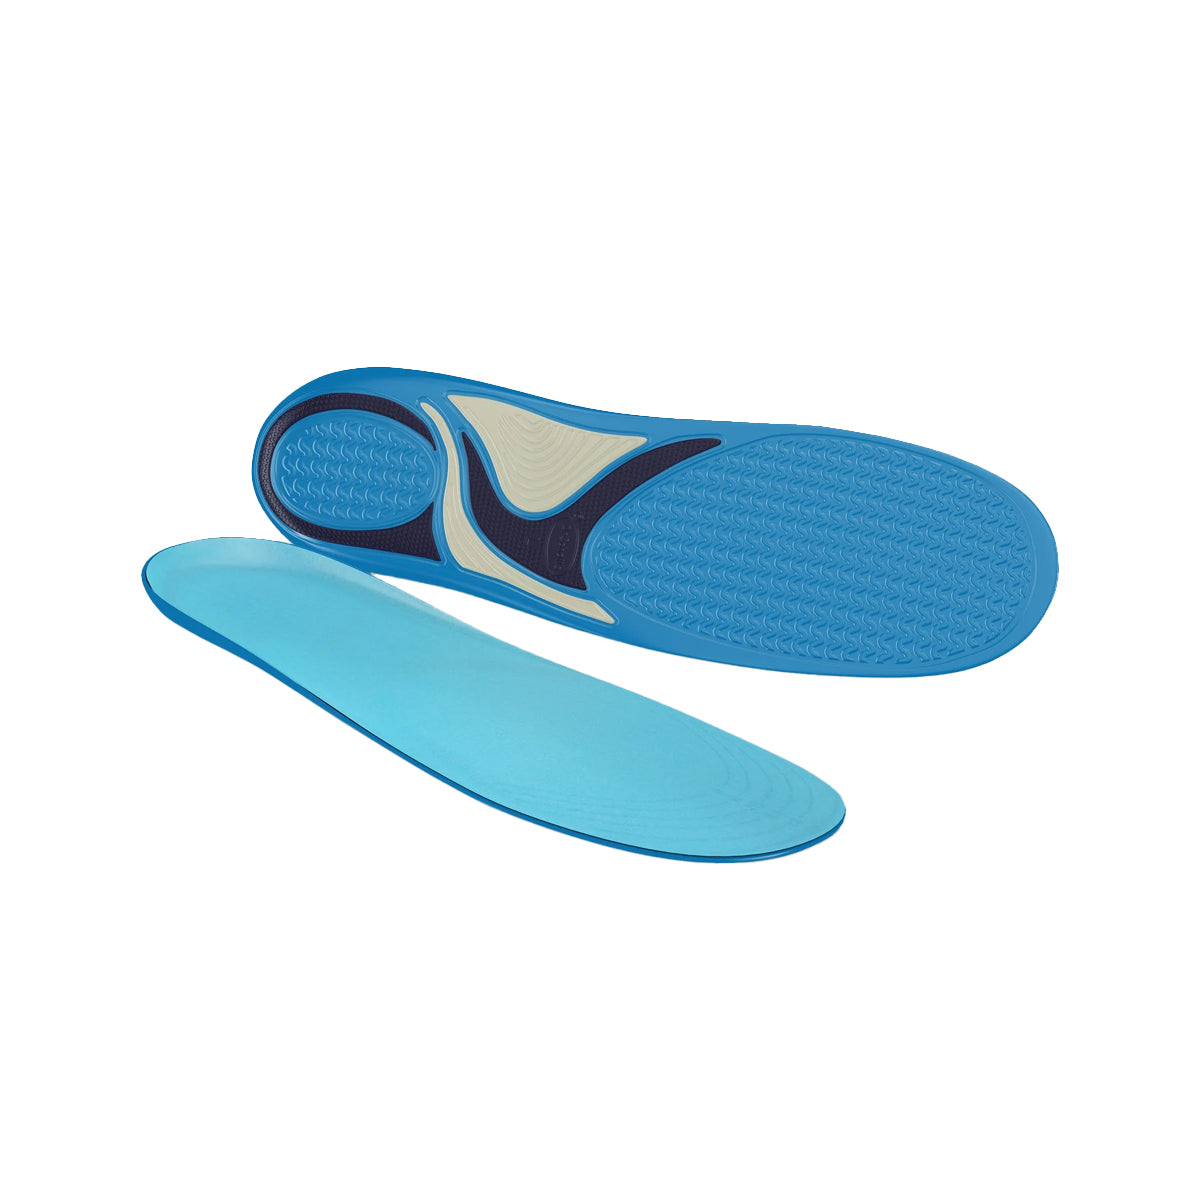 Dr.Scholl's Comfort & Energy Energizing Comfort Everyday Insoles with Massaging Gel